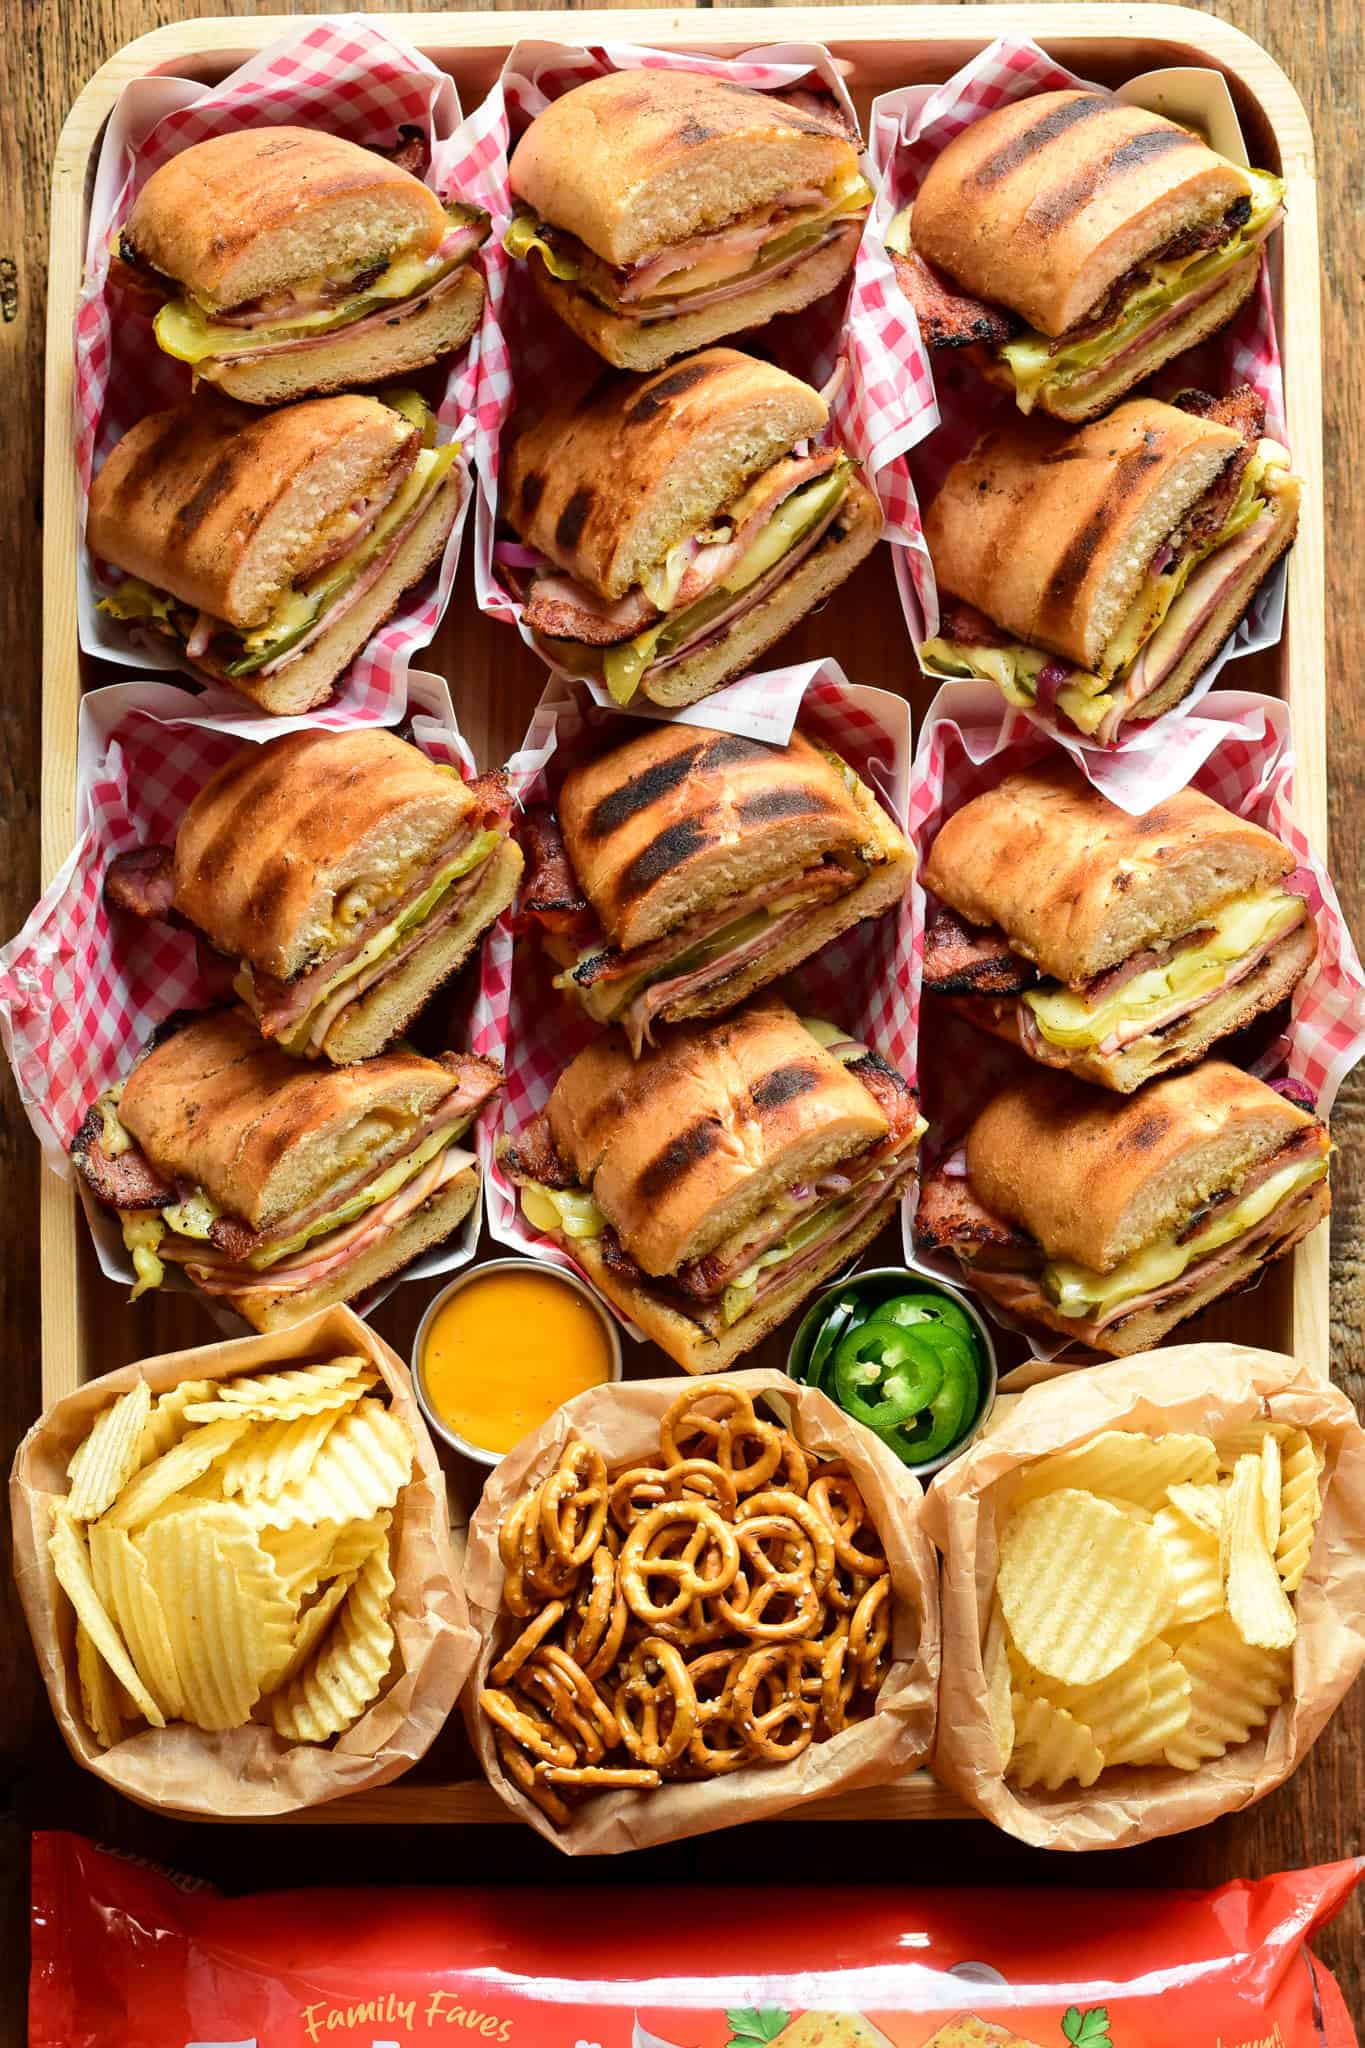 A tray of grilled Cuban sandwiches (Cubano) with chips and pretzels.